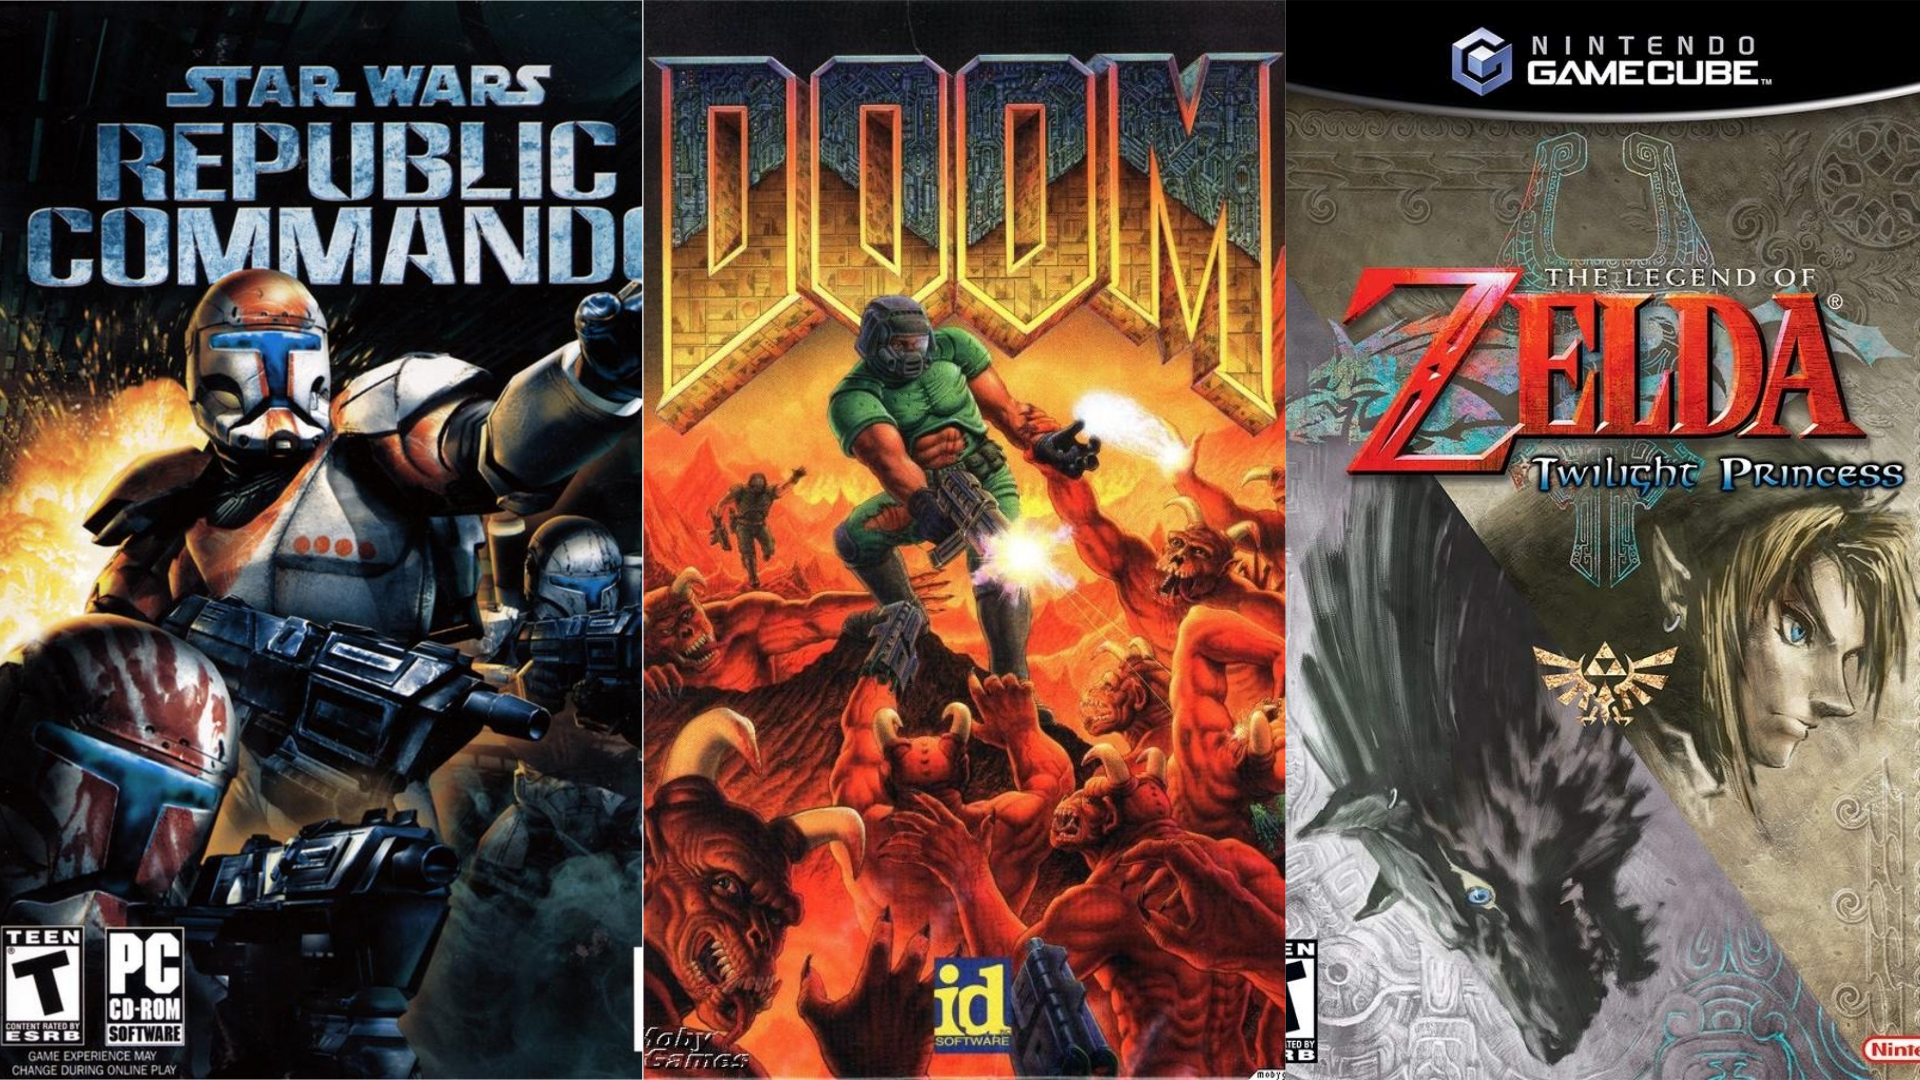 Bet You Can't Name These 10 Games from Their Box Art